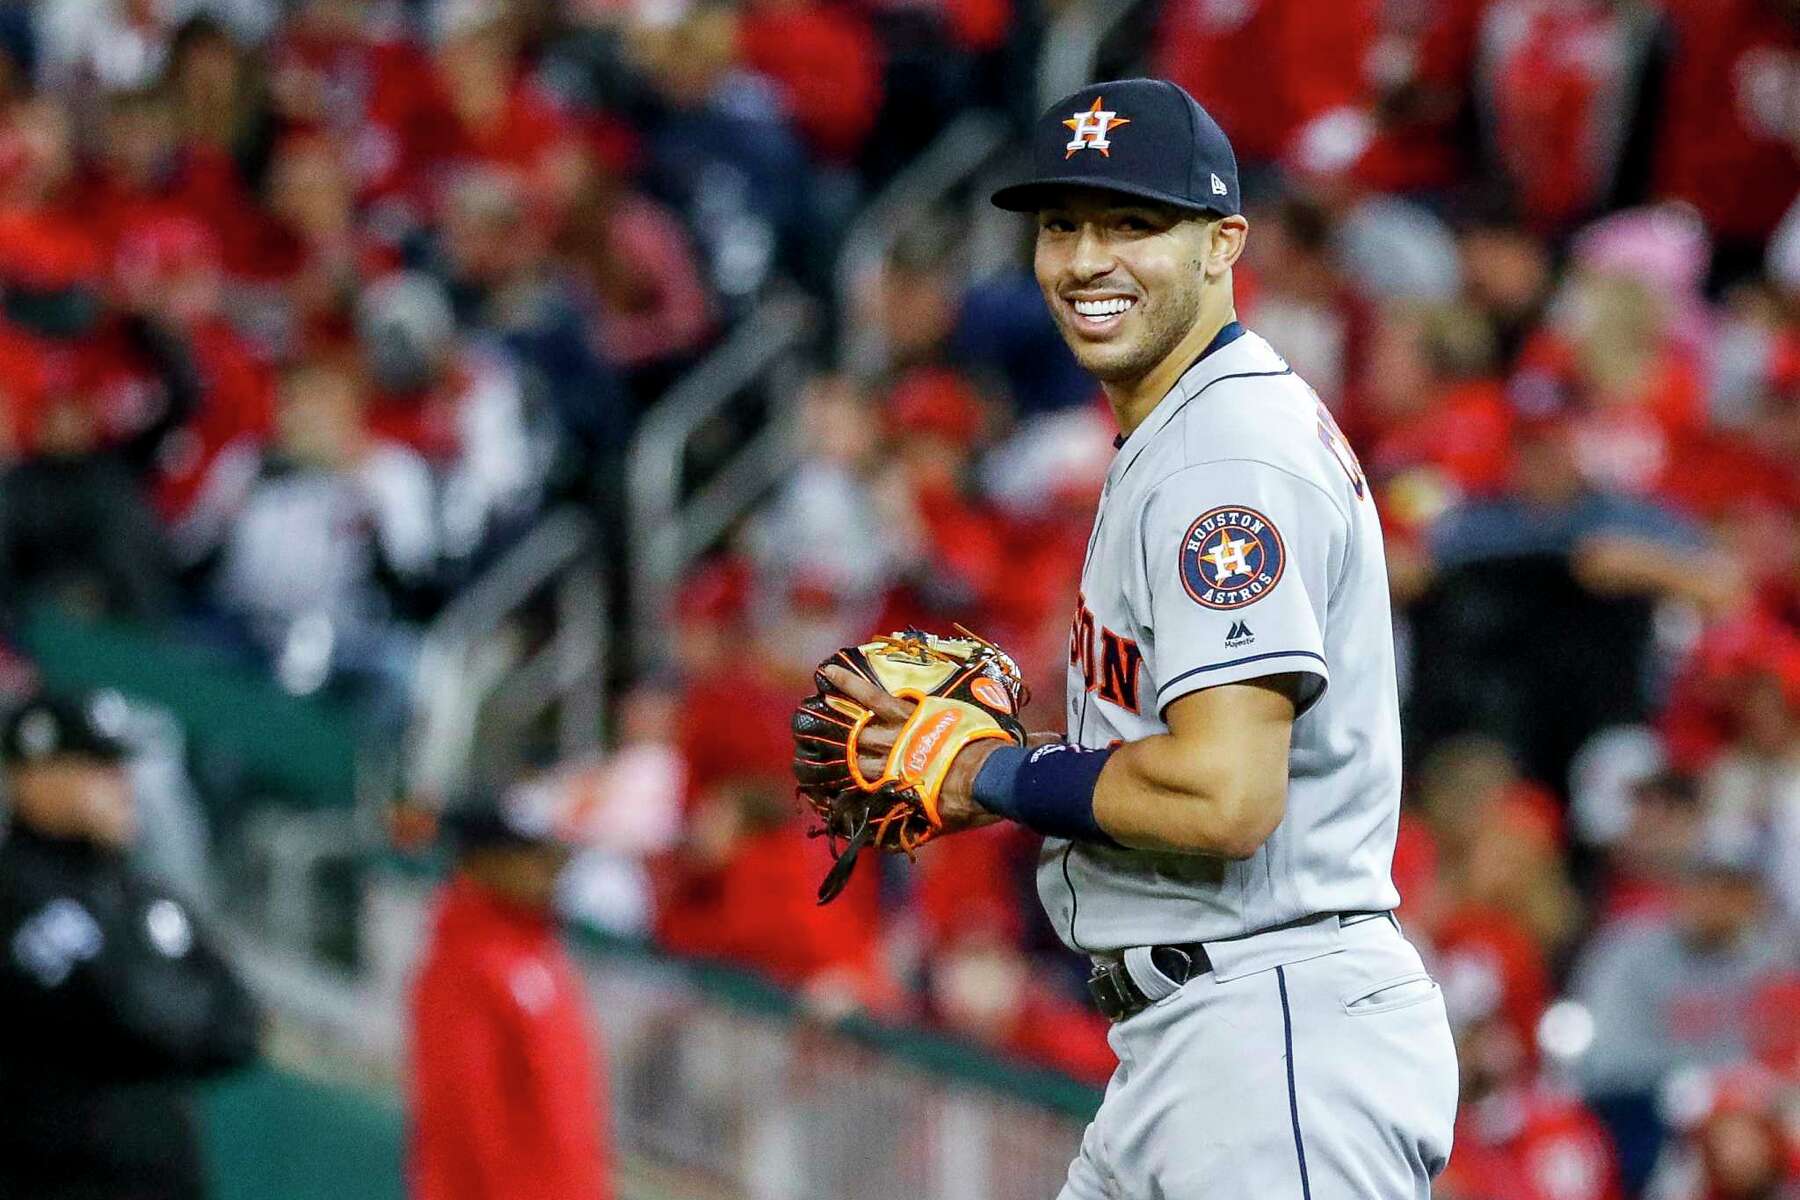 Carlos Correa's departure from Houston is now official, signs